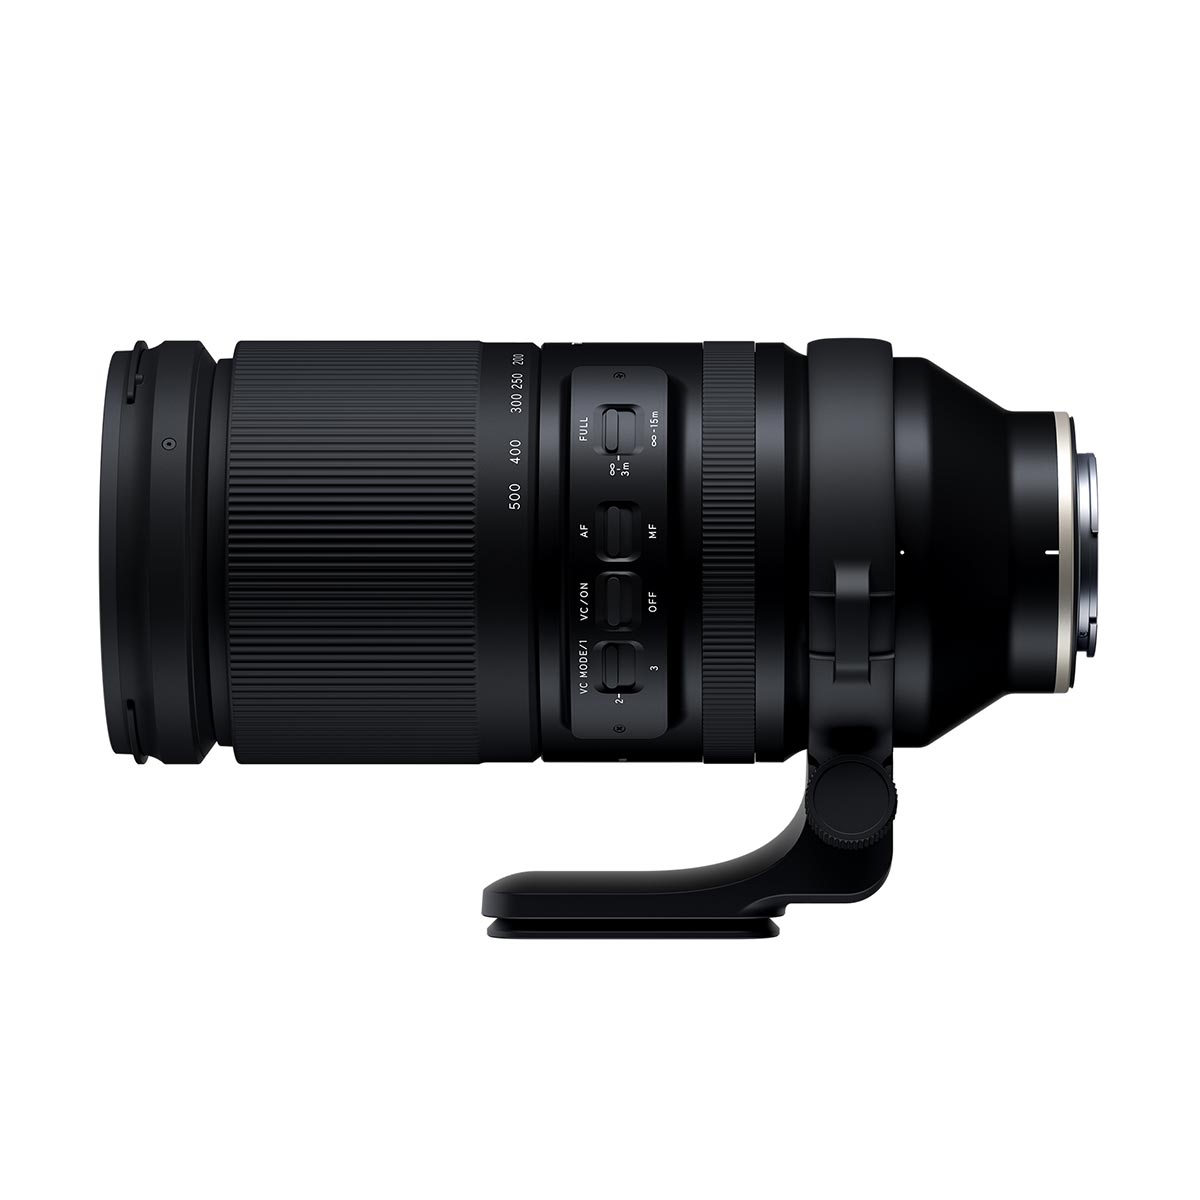 Tamron 150-500mm f/5-6.7 Di III VC VXD Lens for Sony FE